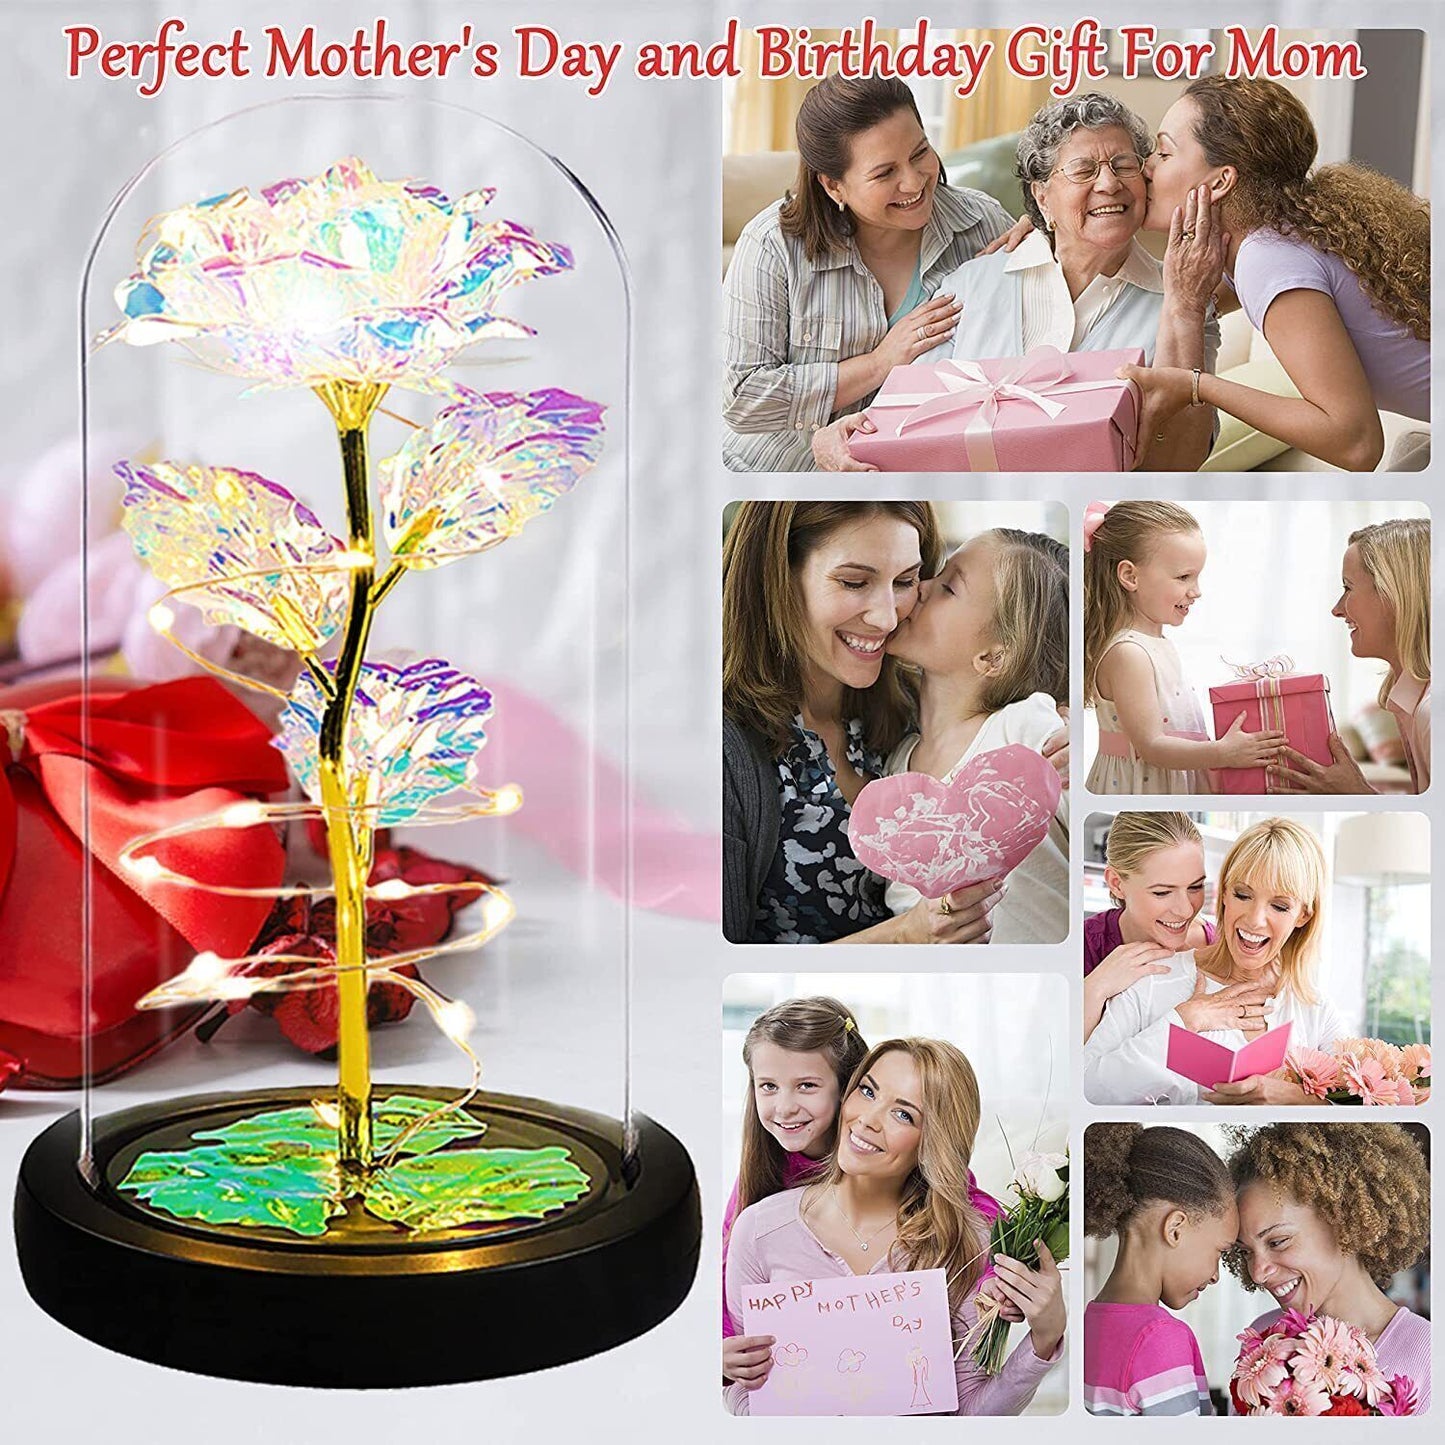 Enchanted Galaxy Rose: Eternal Beauty for Mother's Day  or  Women gift